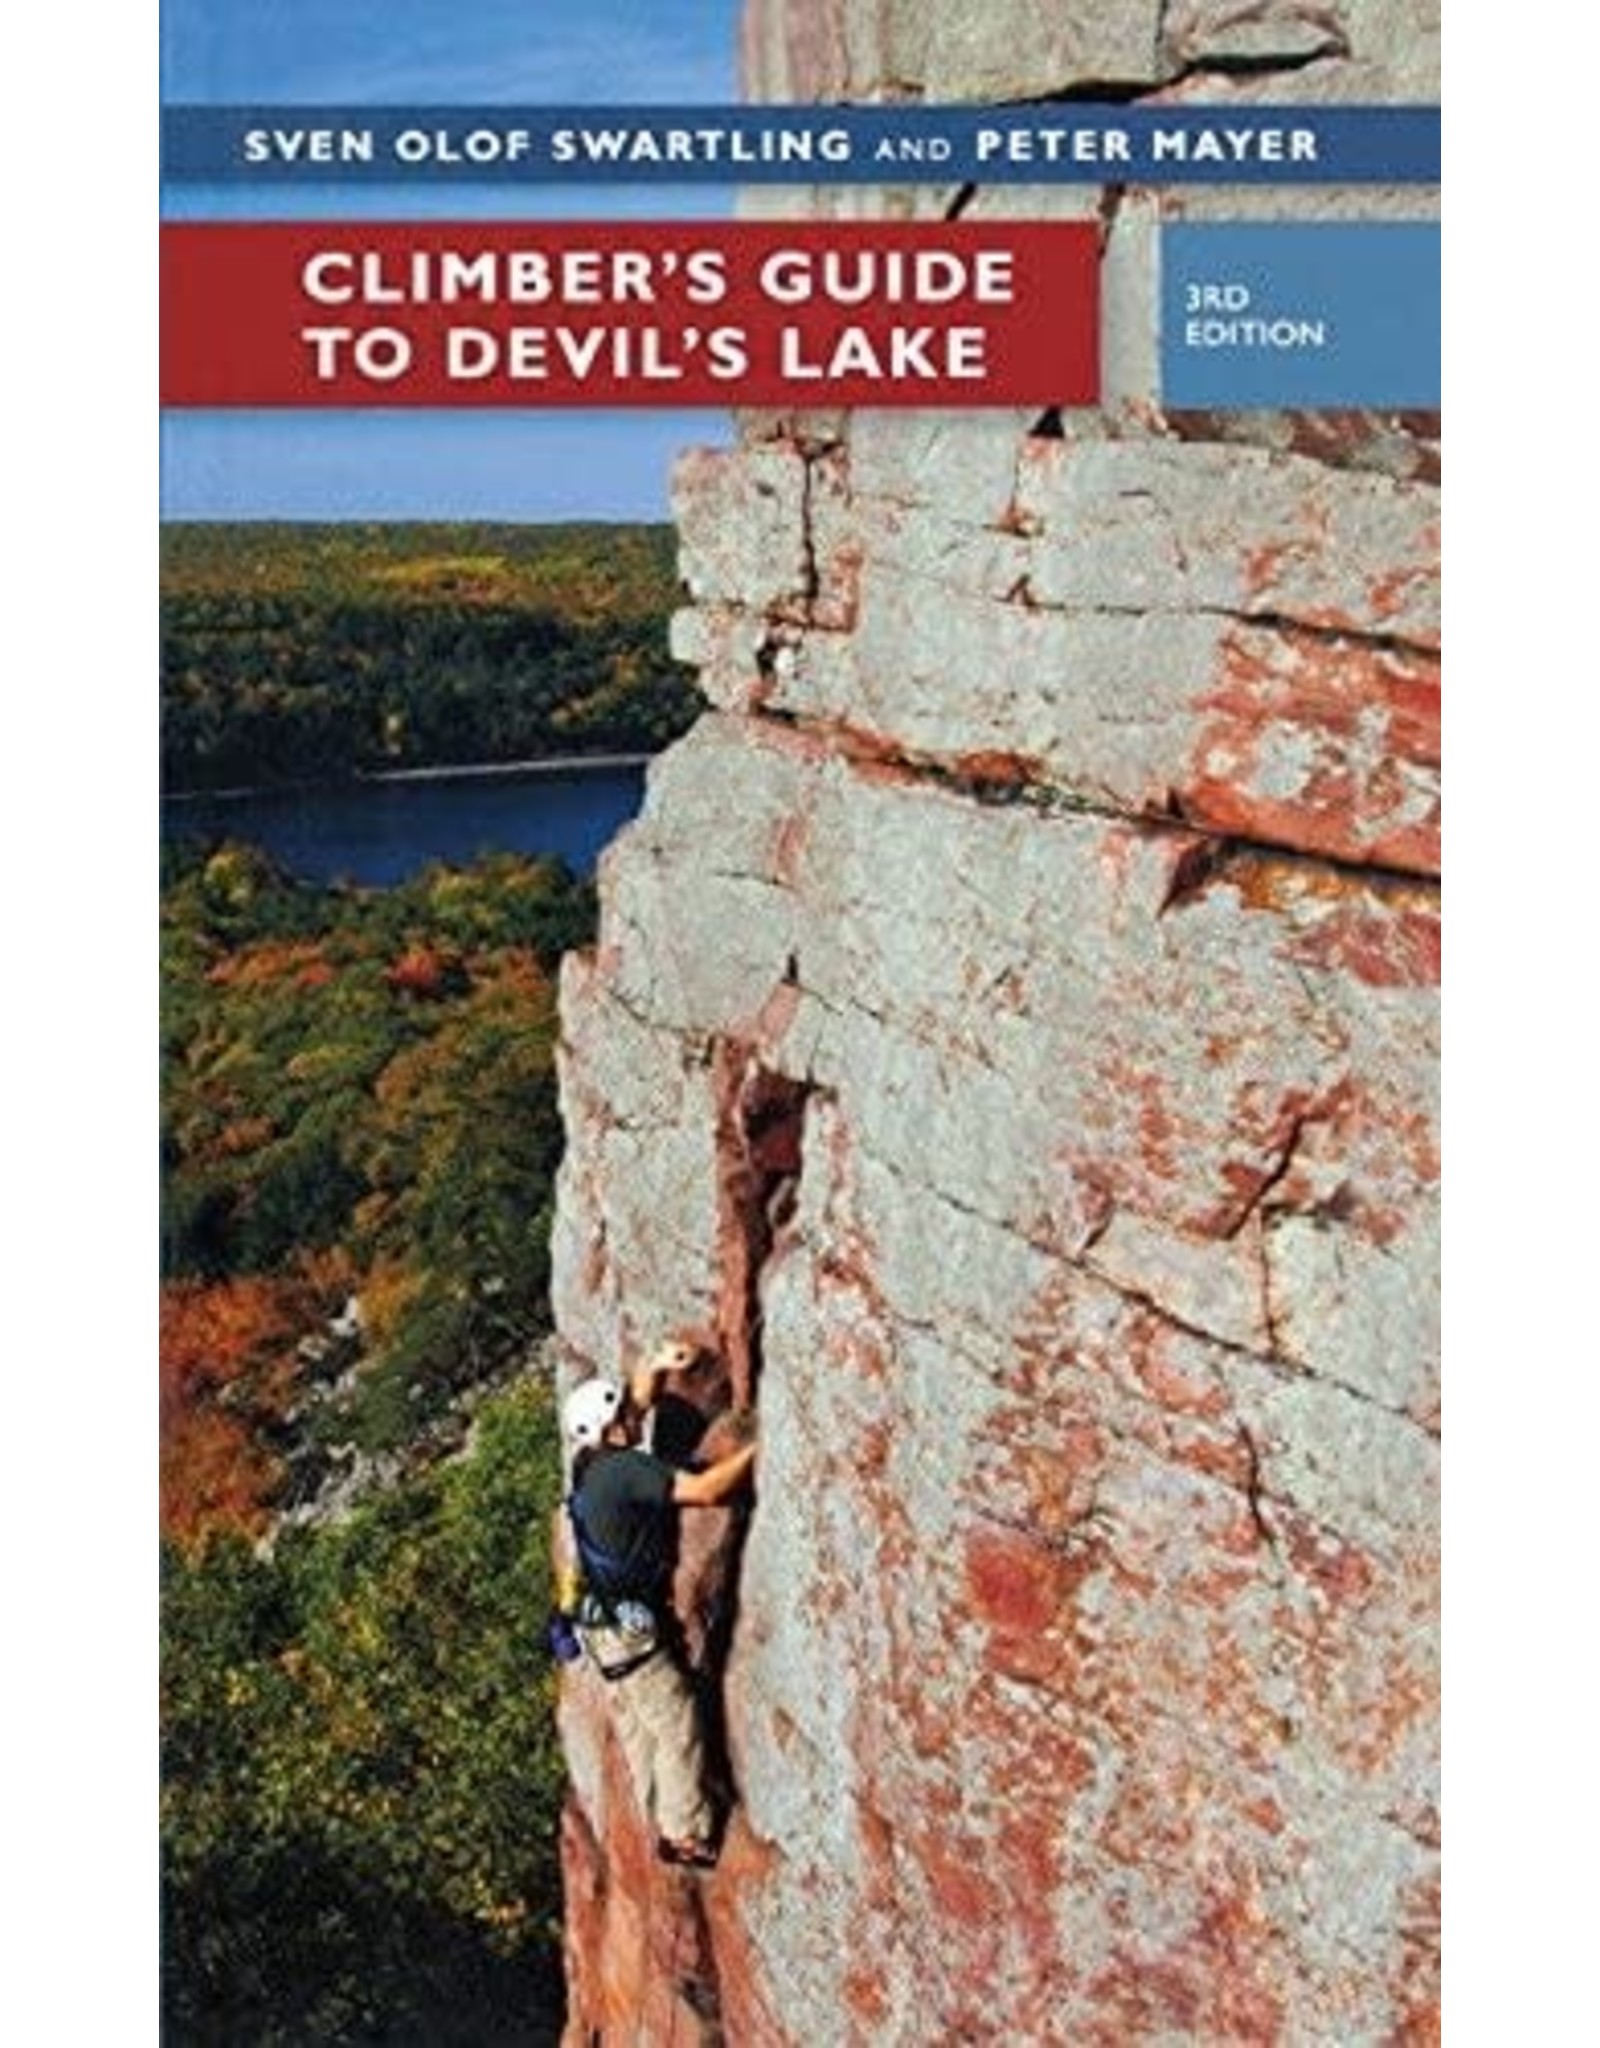 U OF WISCONSIN PRESS Climber’s Guide to Devil’s Lake - Swarling